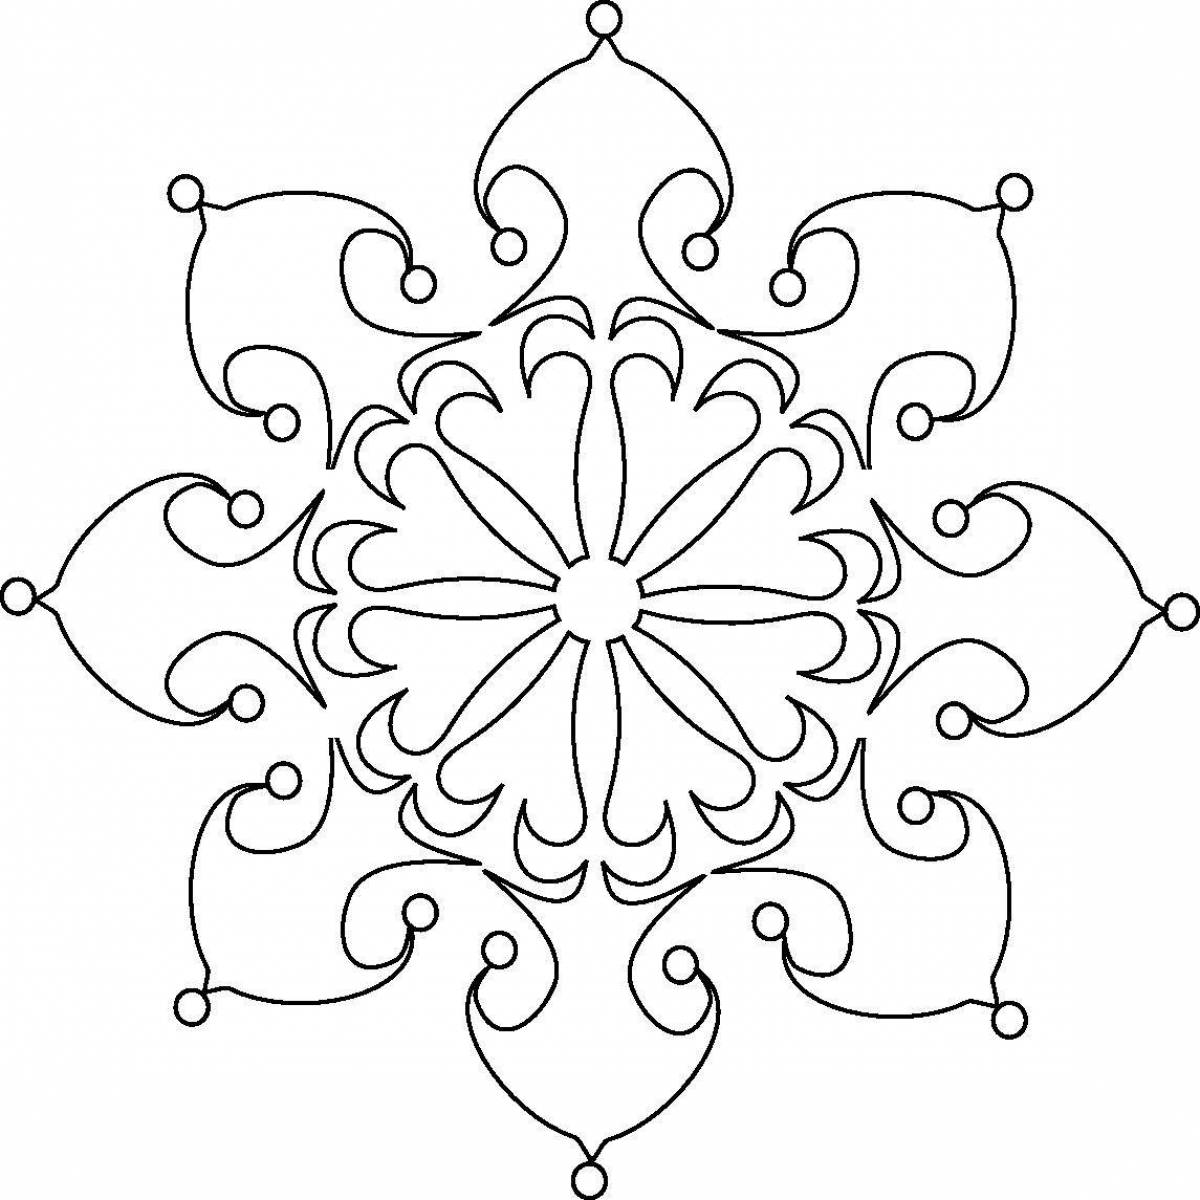 Tempting coloring pages frosty patterns